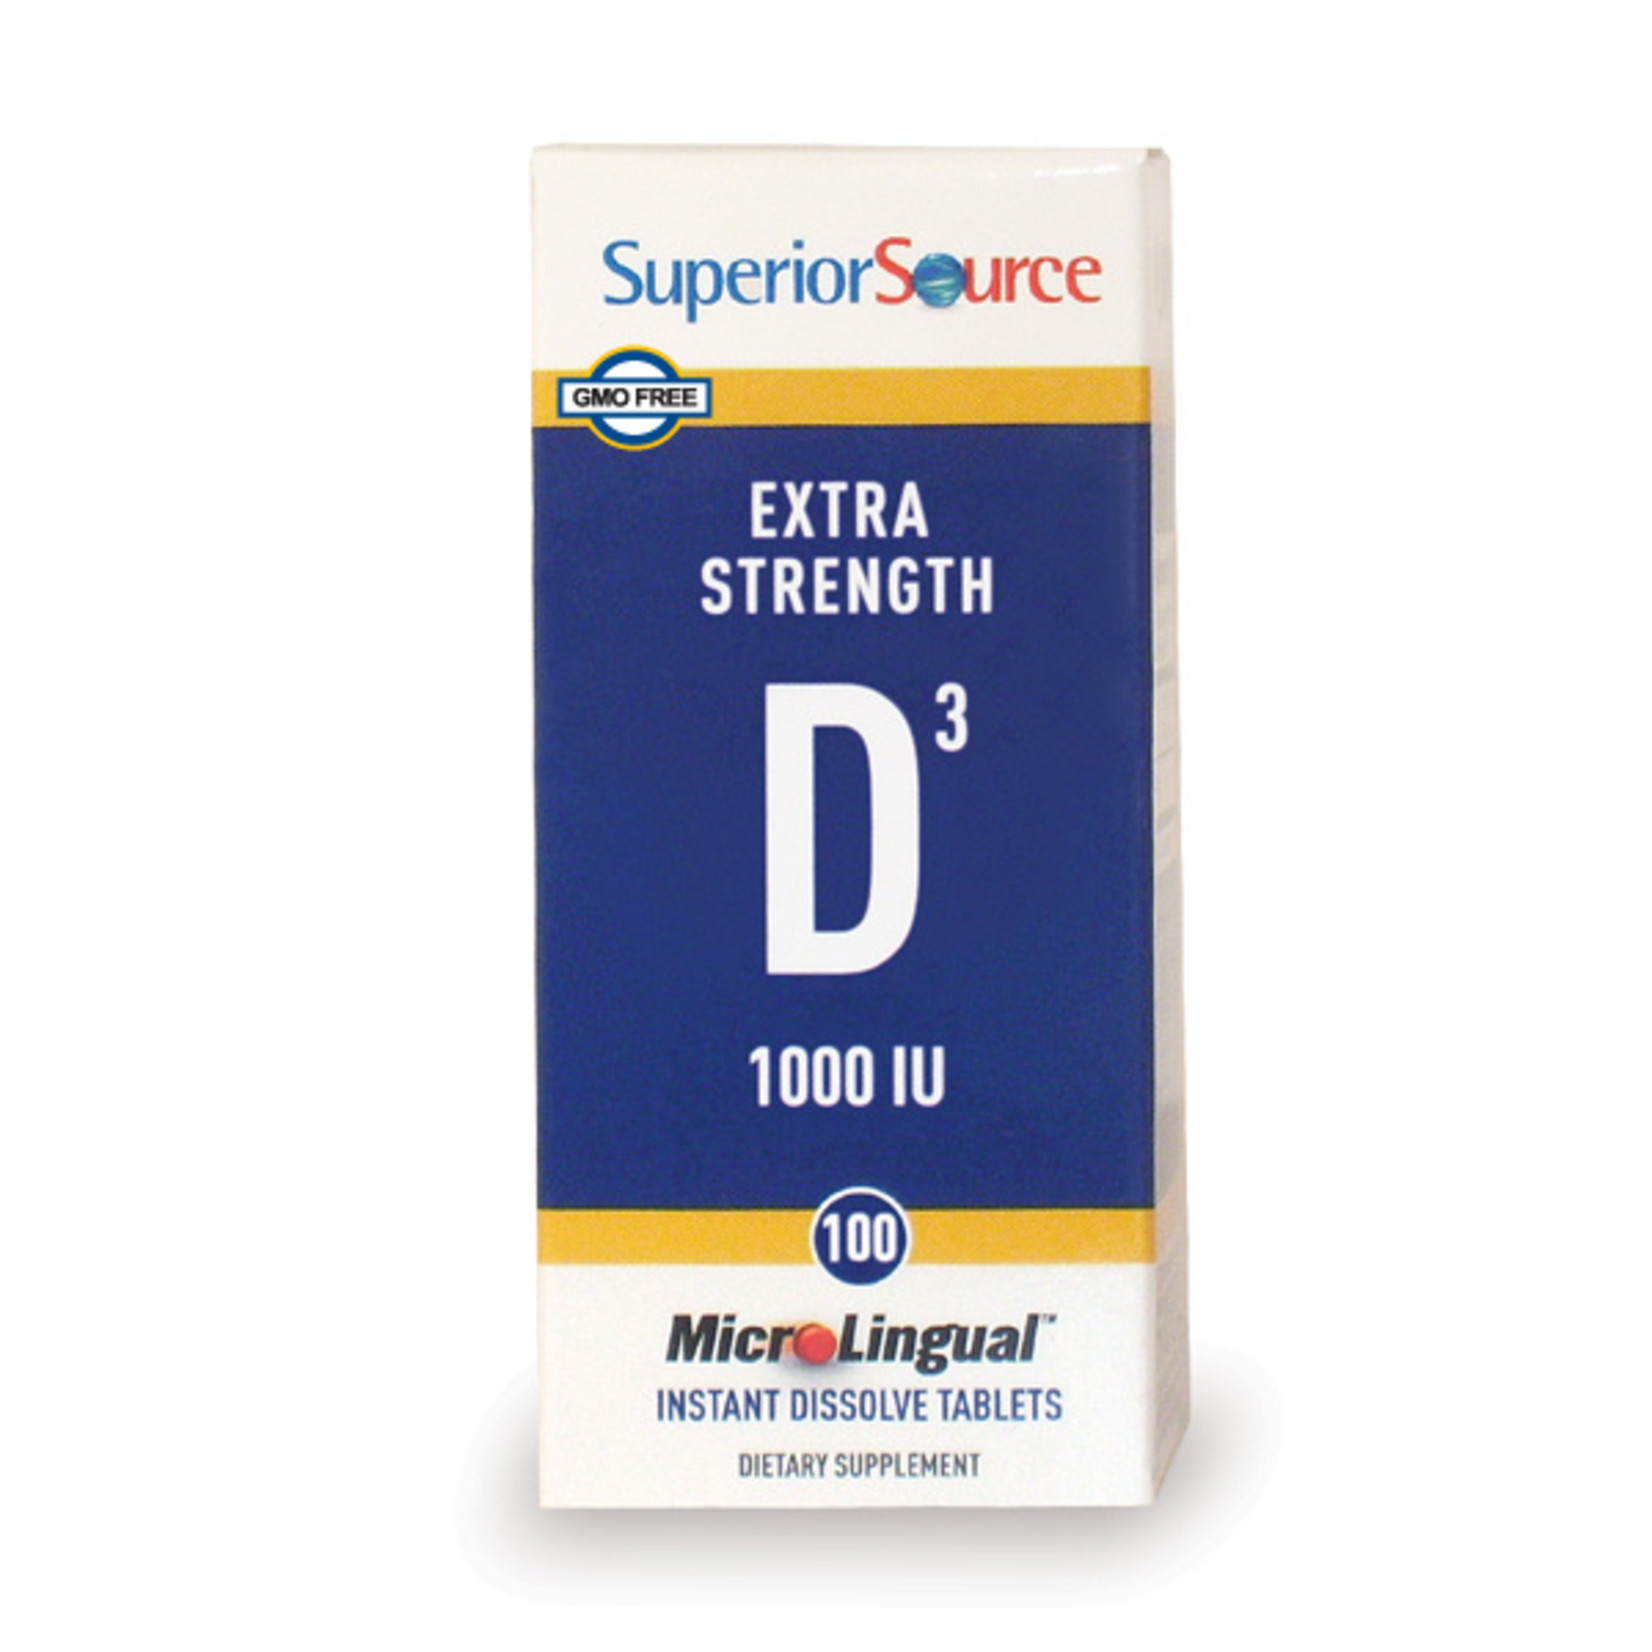 Superior Source Superior Source - Microlingual Extra Strength D3 1000 IU - 100 Tablets